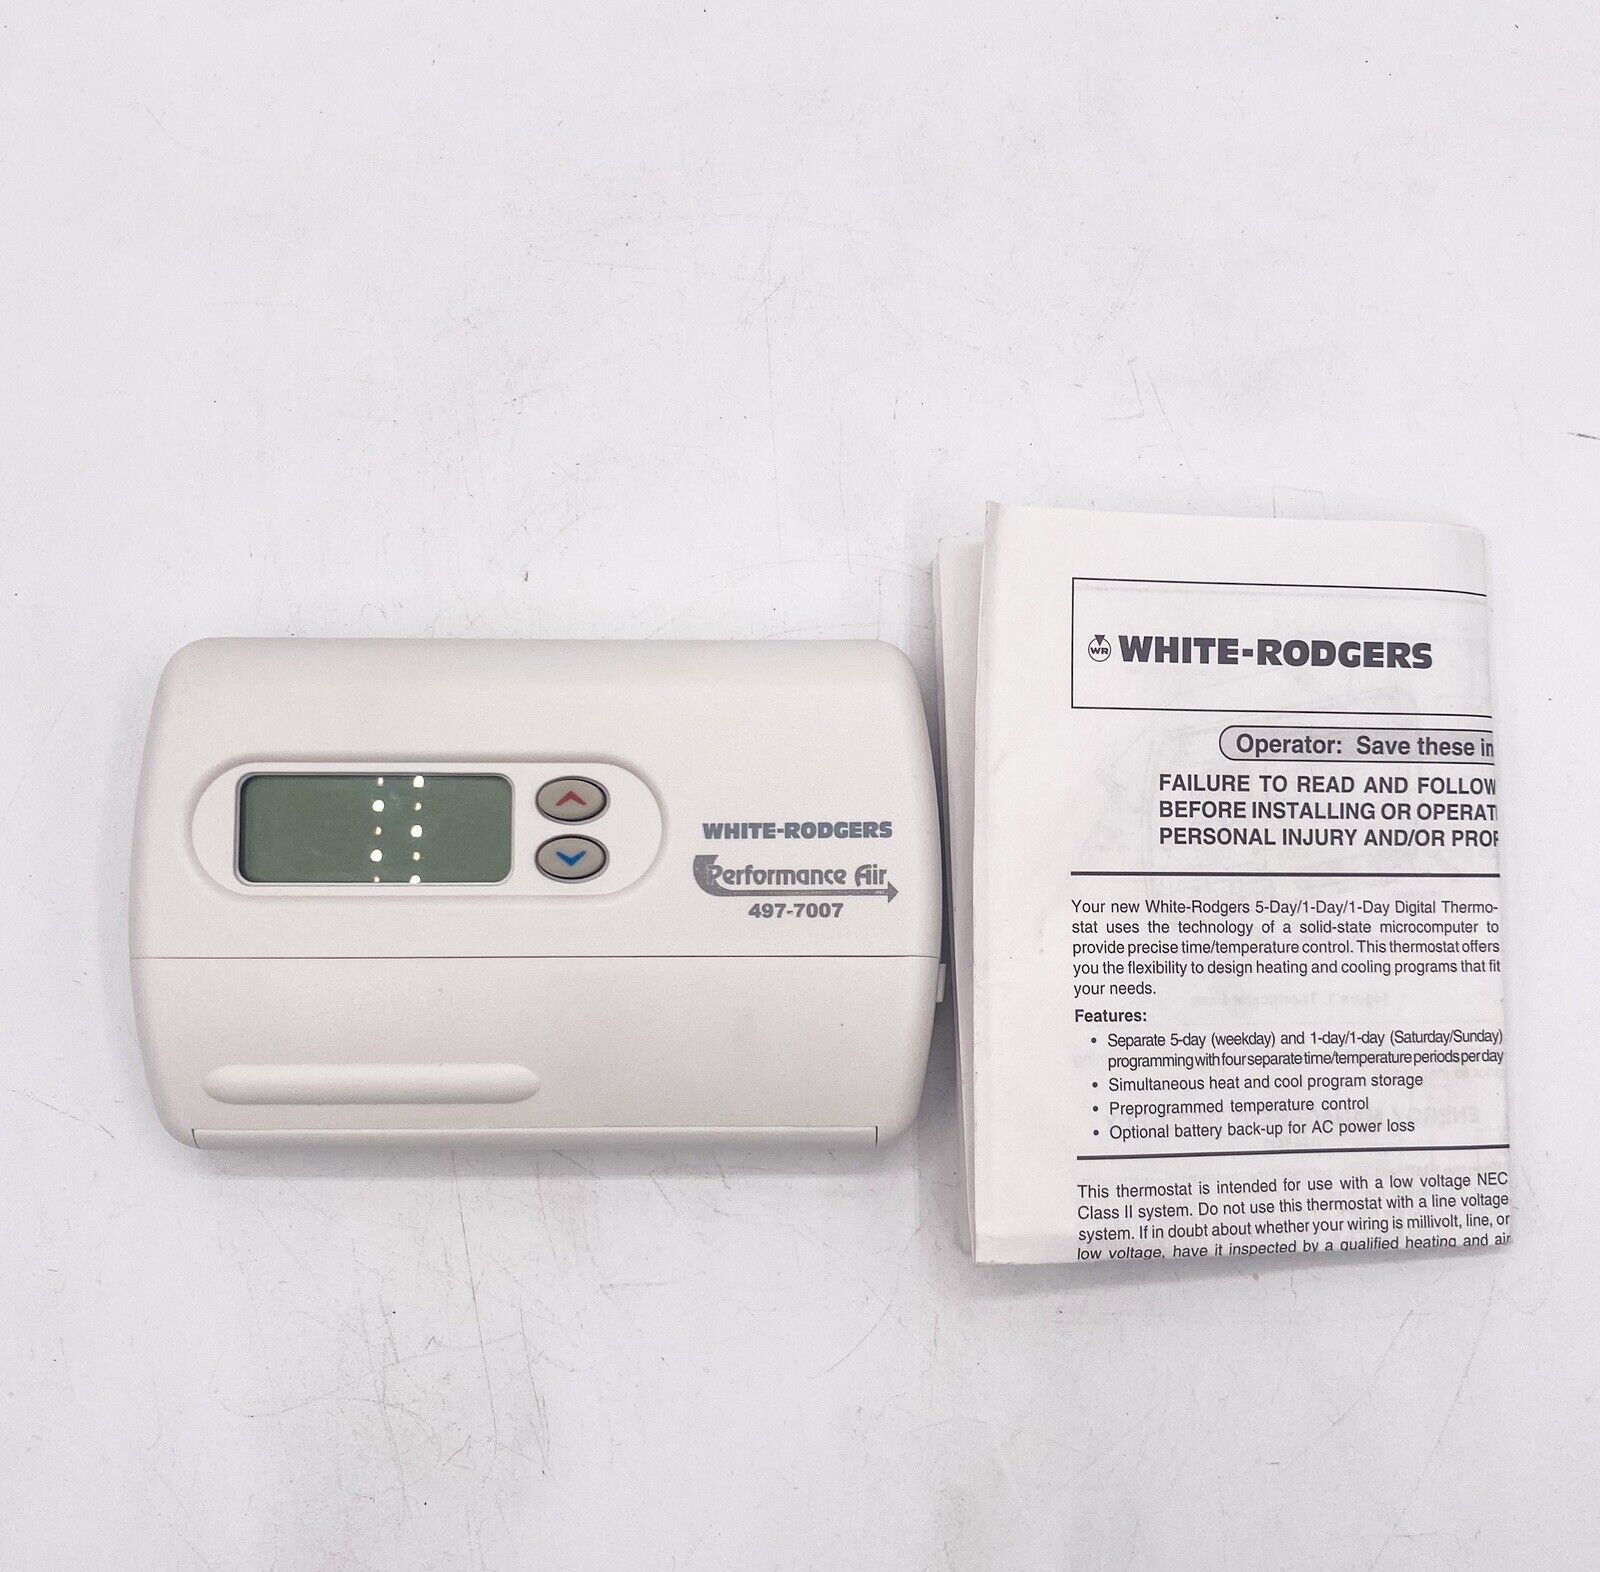 White-Rodgers 1F81-261 Digital 5/1/1 Programmable Thermostat - White EXCELLENT